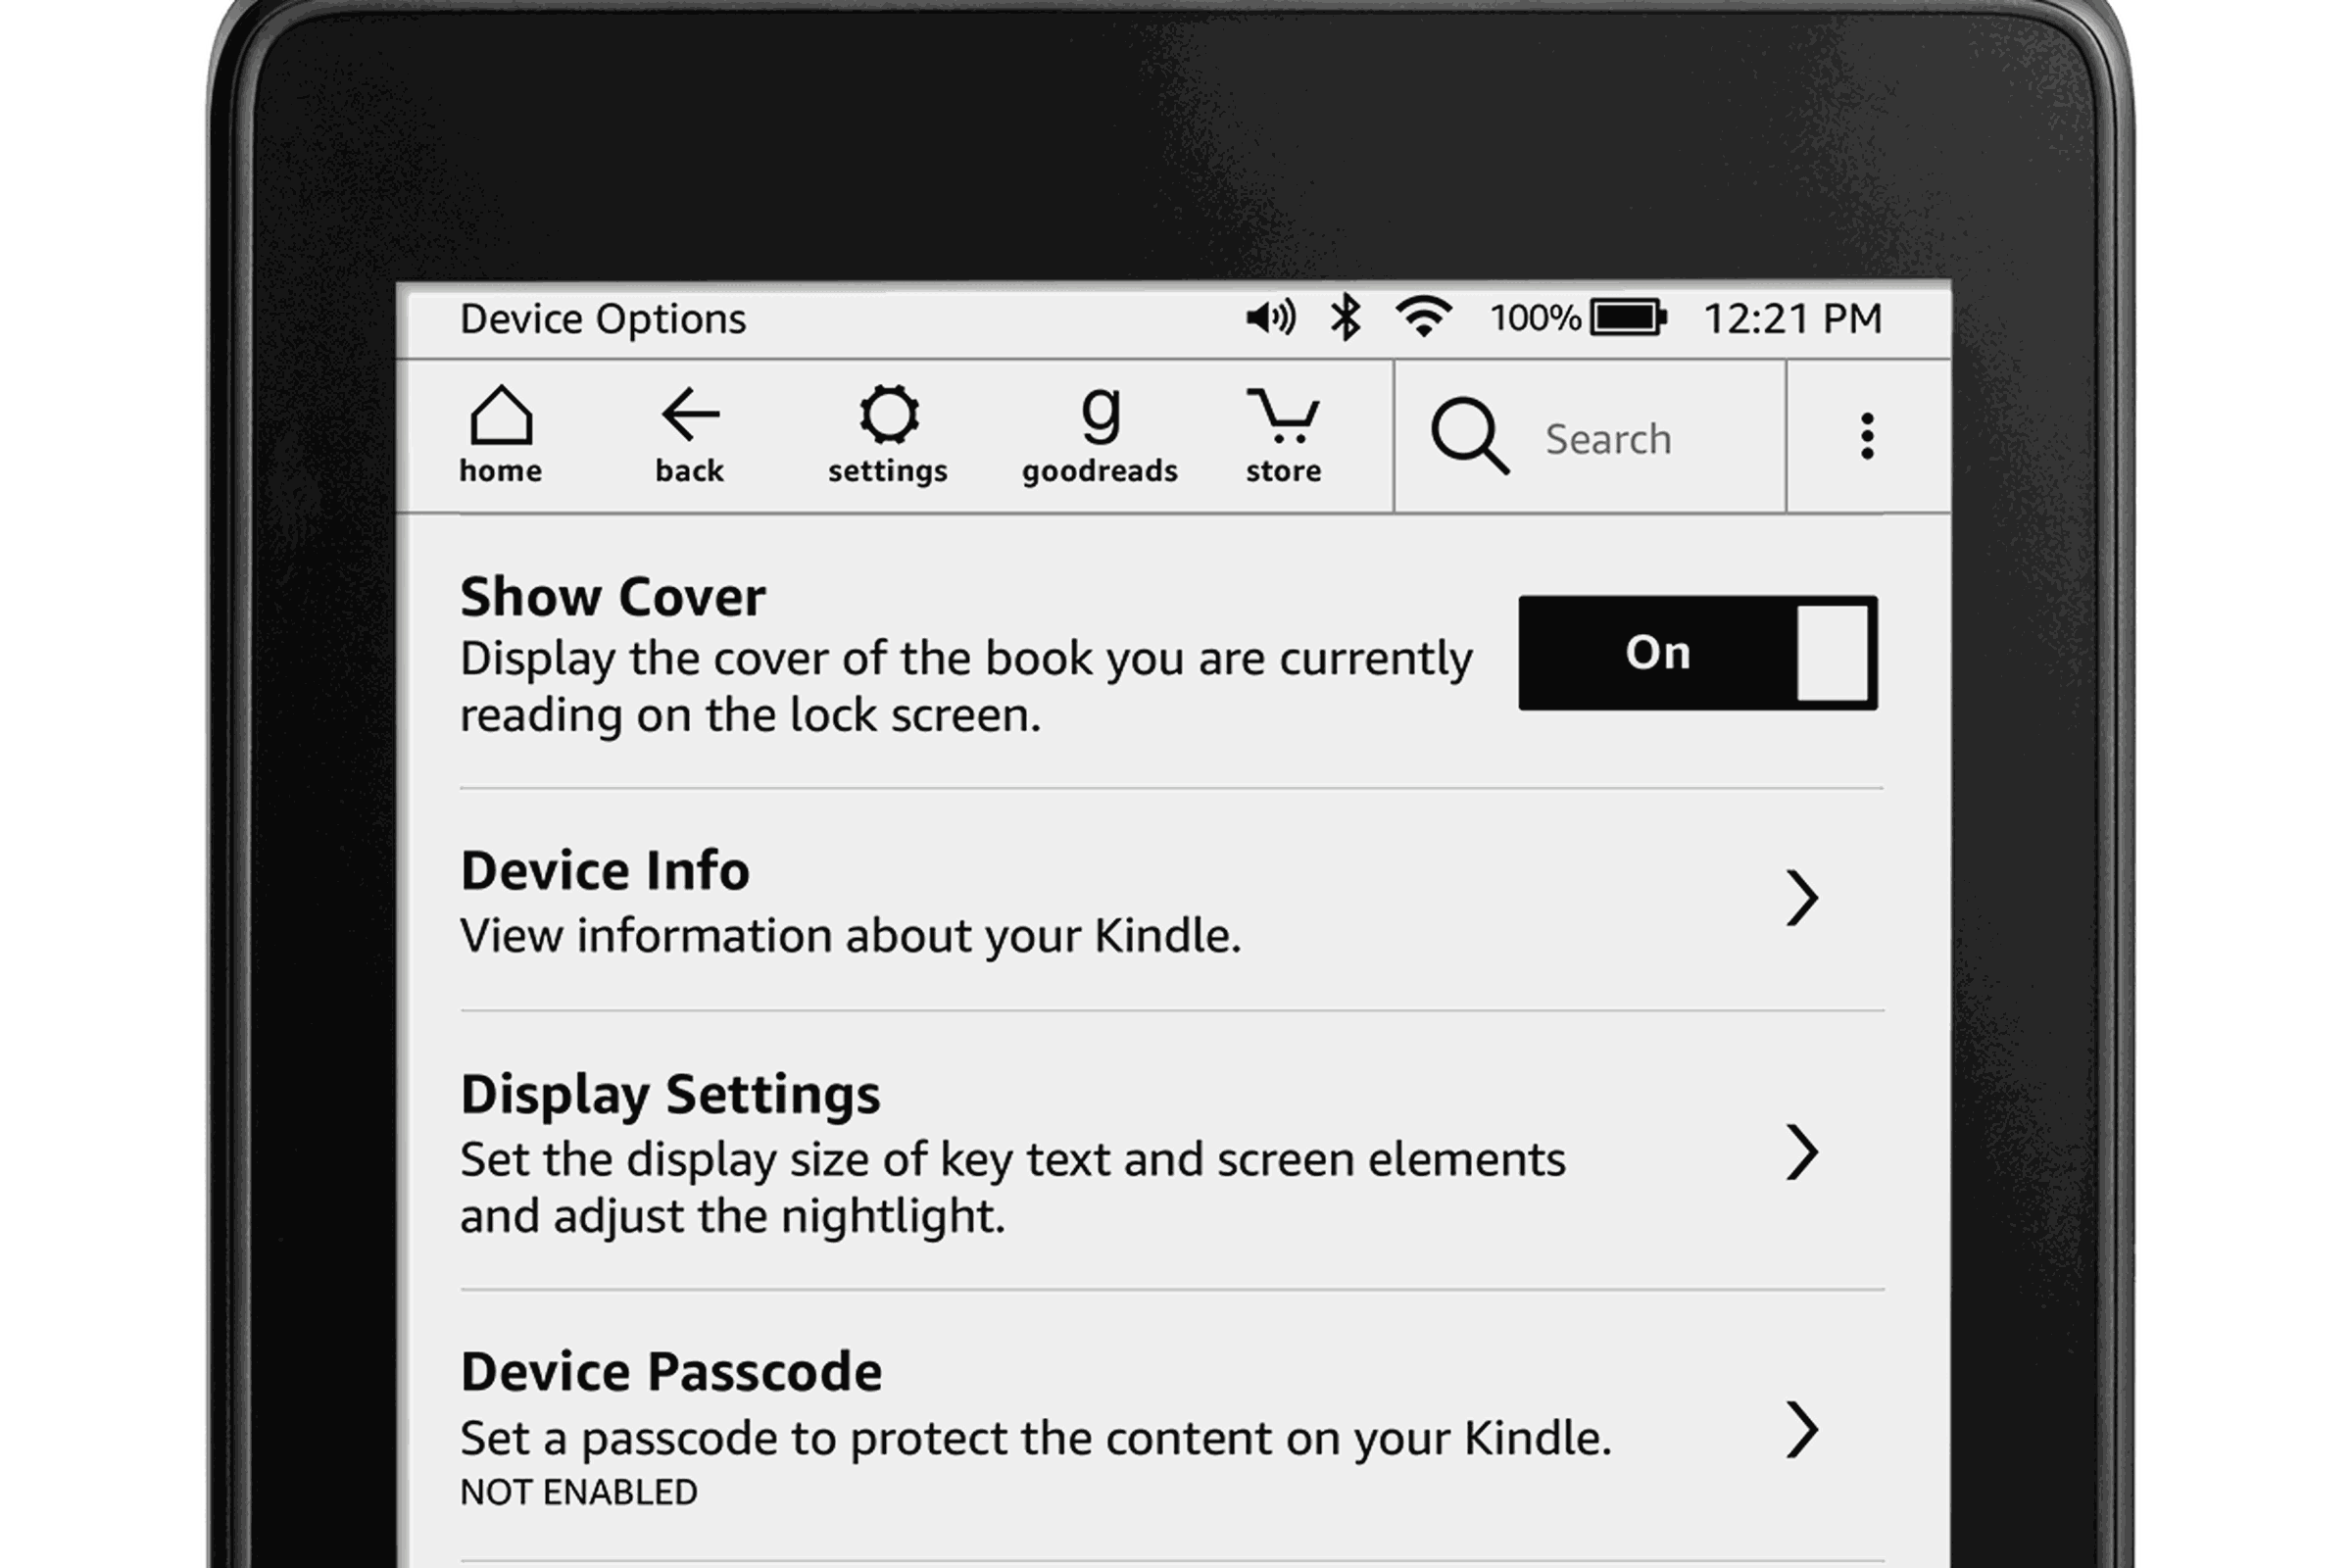 How to enables the Display Cover feature.